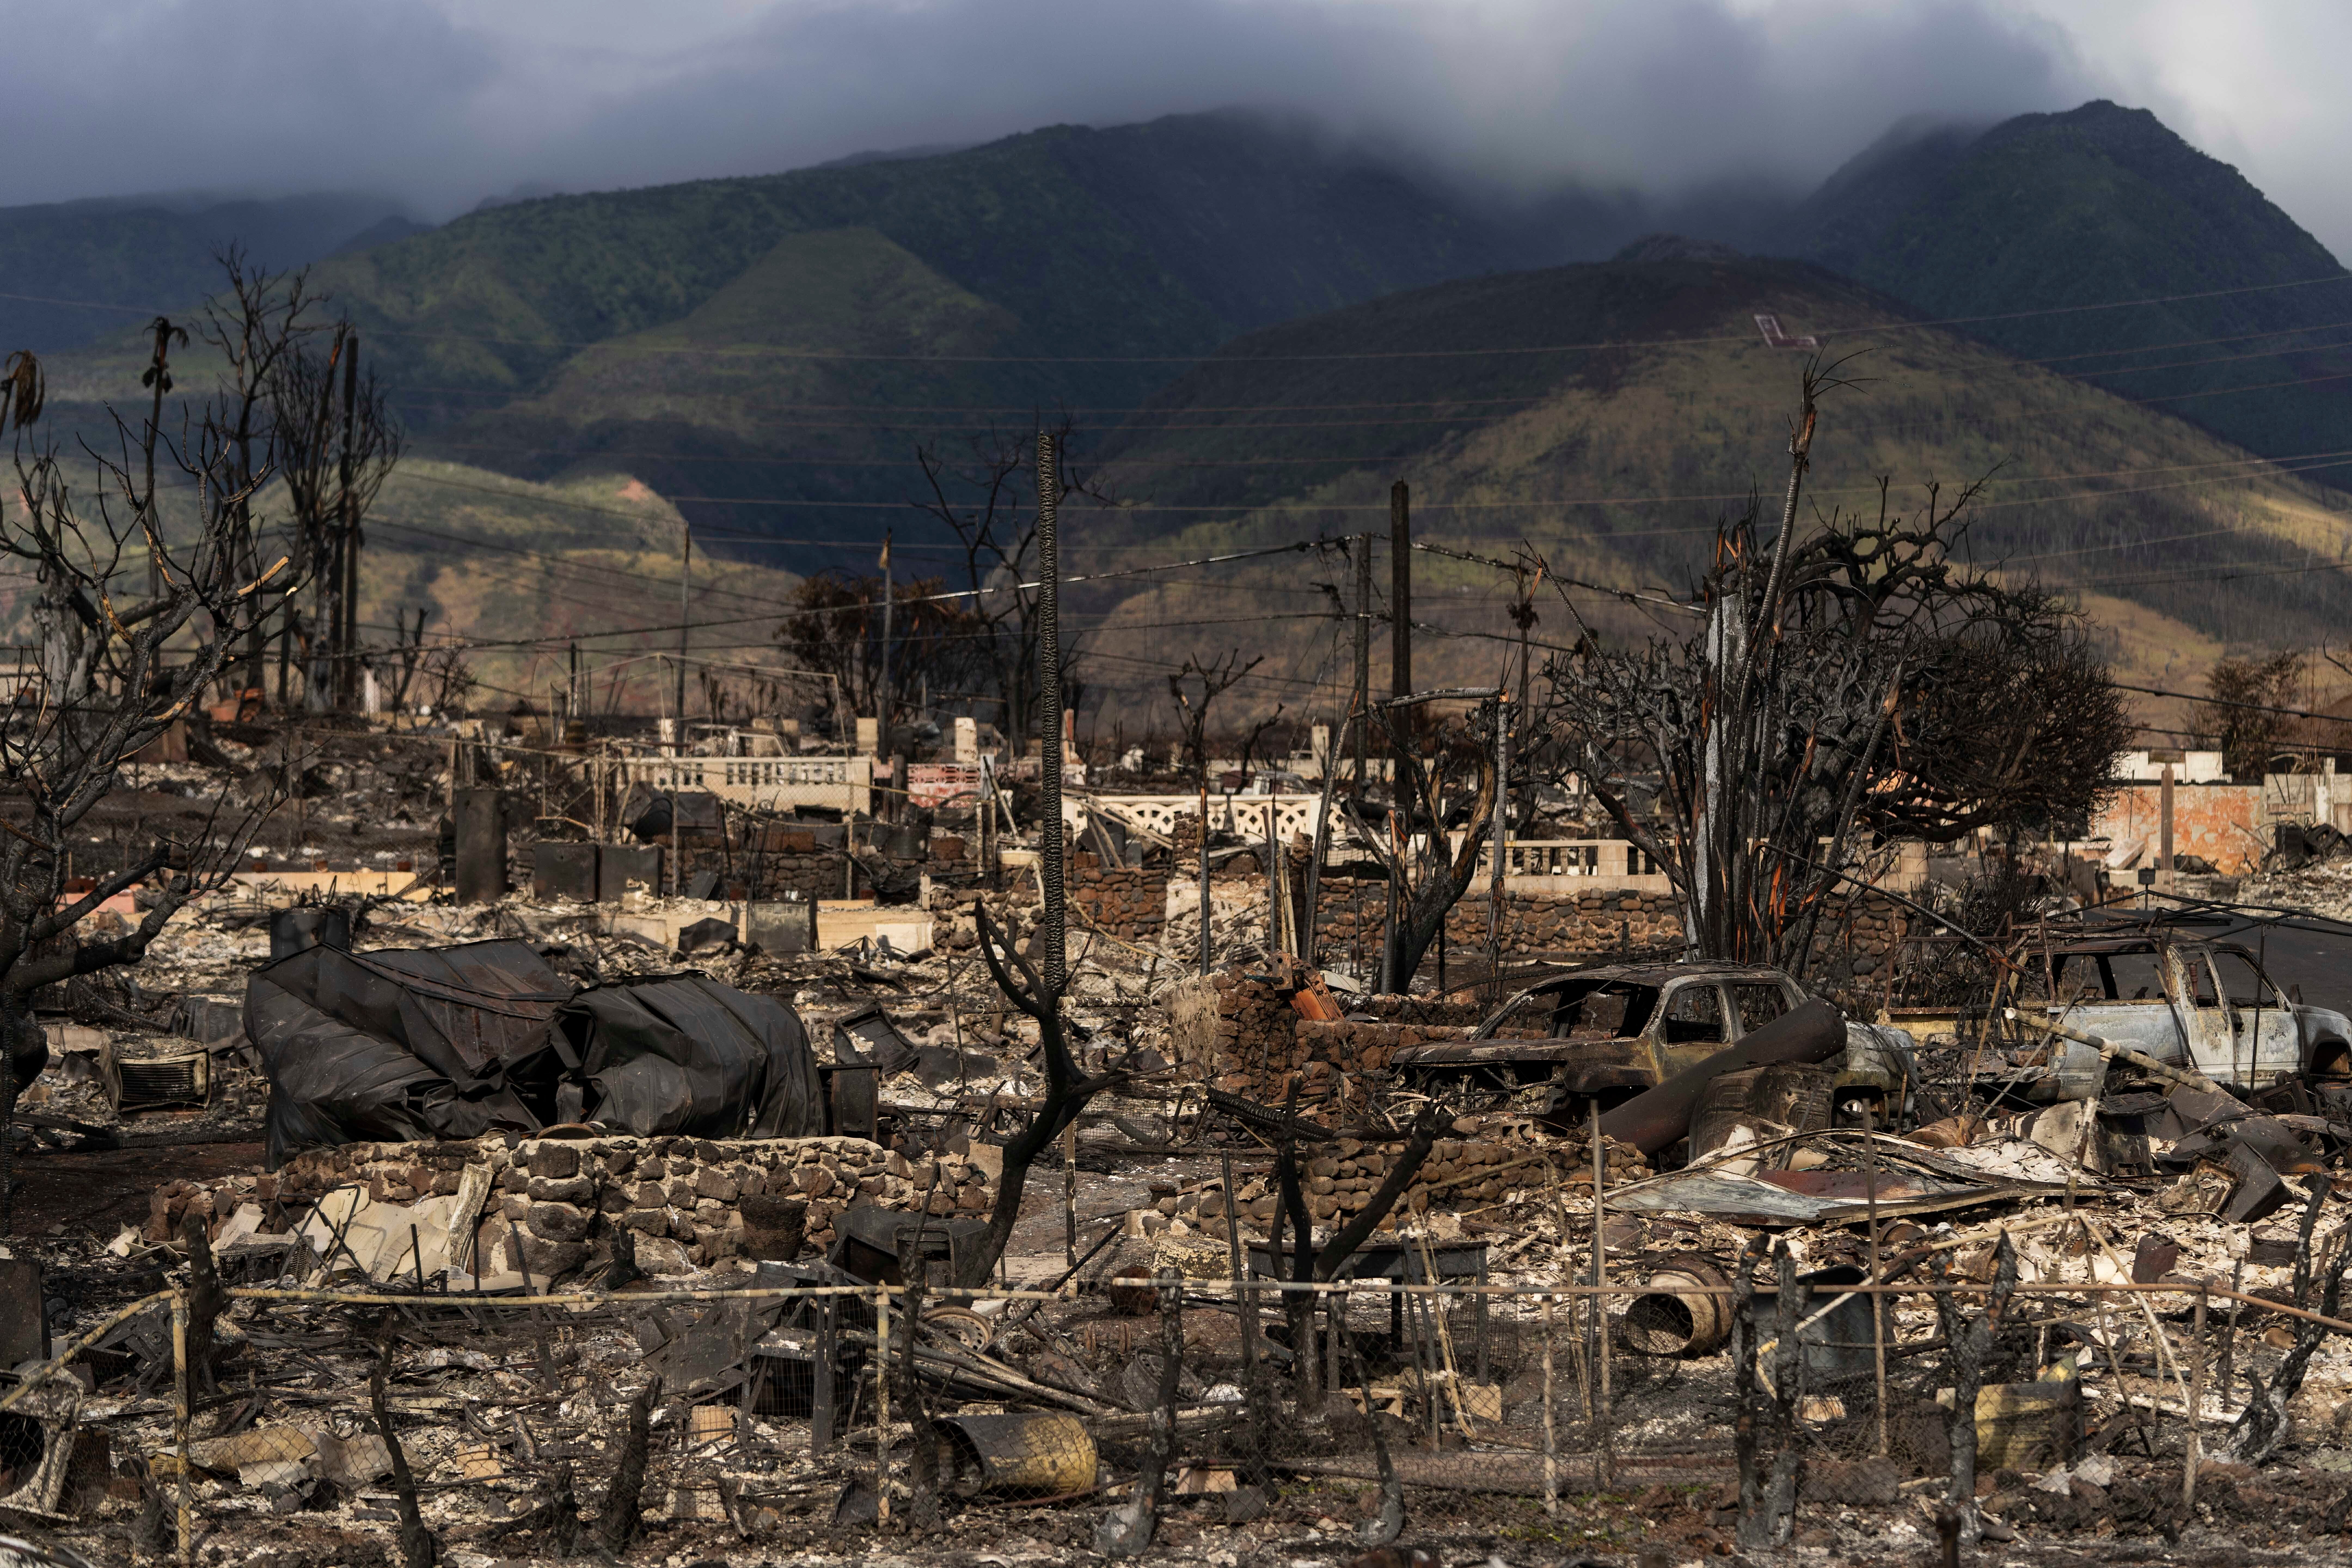 Damaged property lies scattered in the aftermath of a wildfire in Lahaina